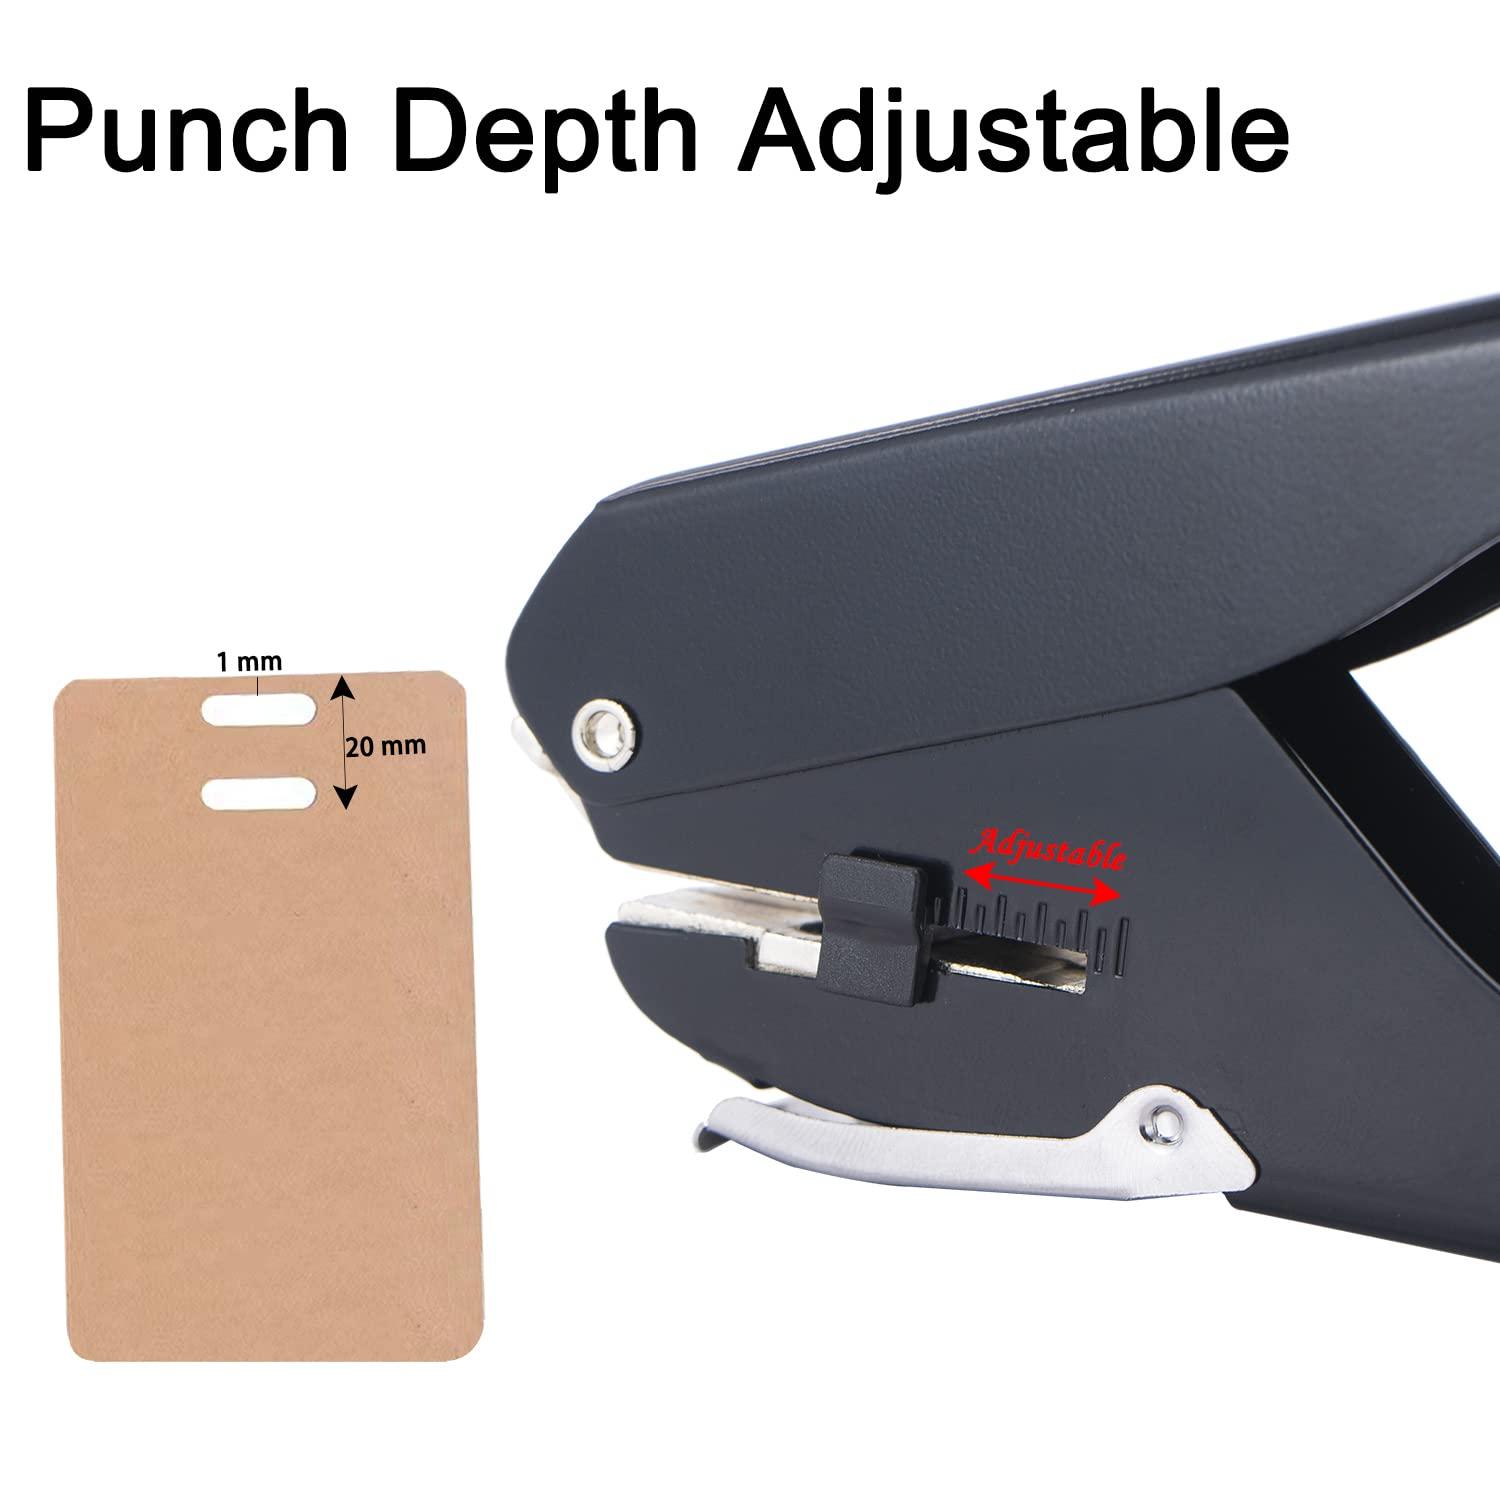 Tag Punch Gift Tag Puncher 3 in 1 Tag Punch Tag Shape Lever Action